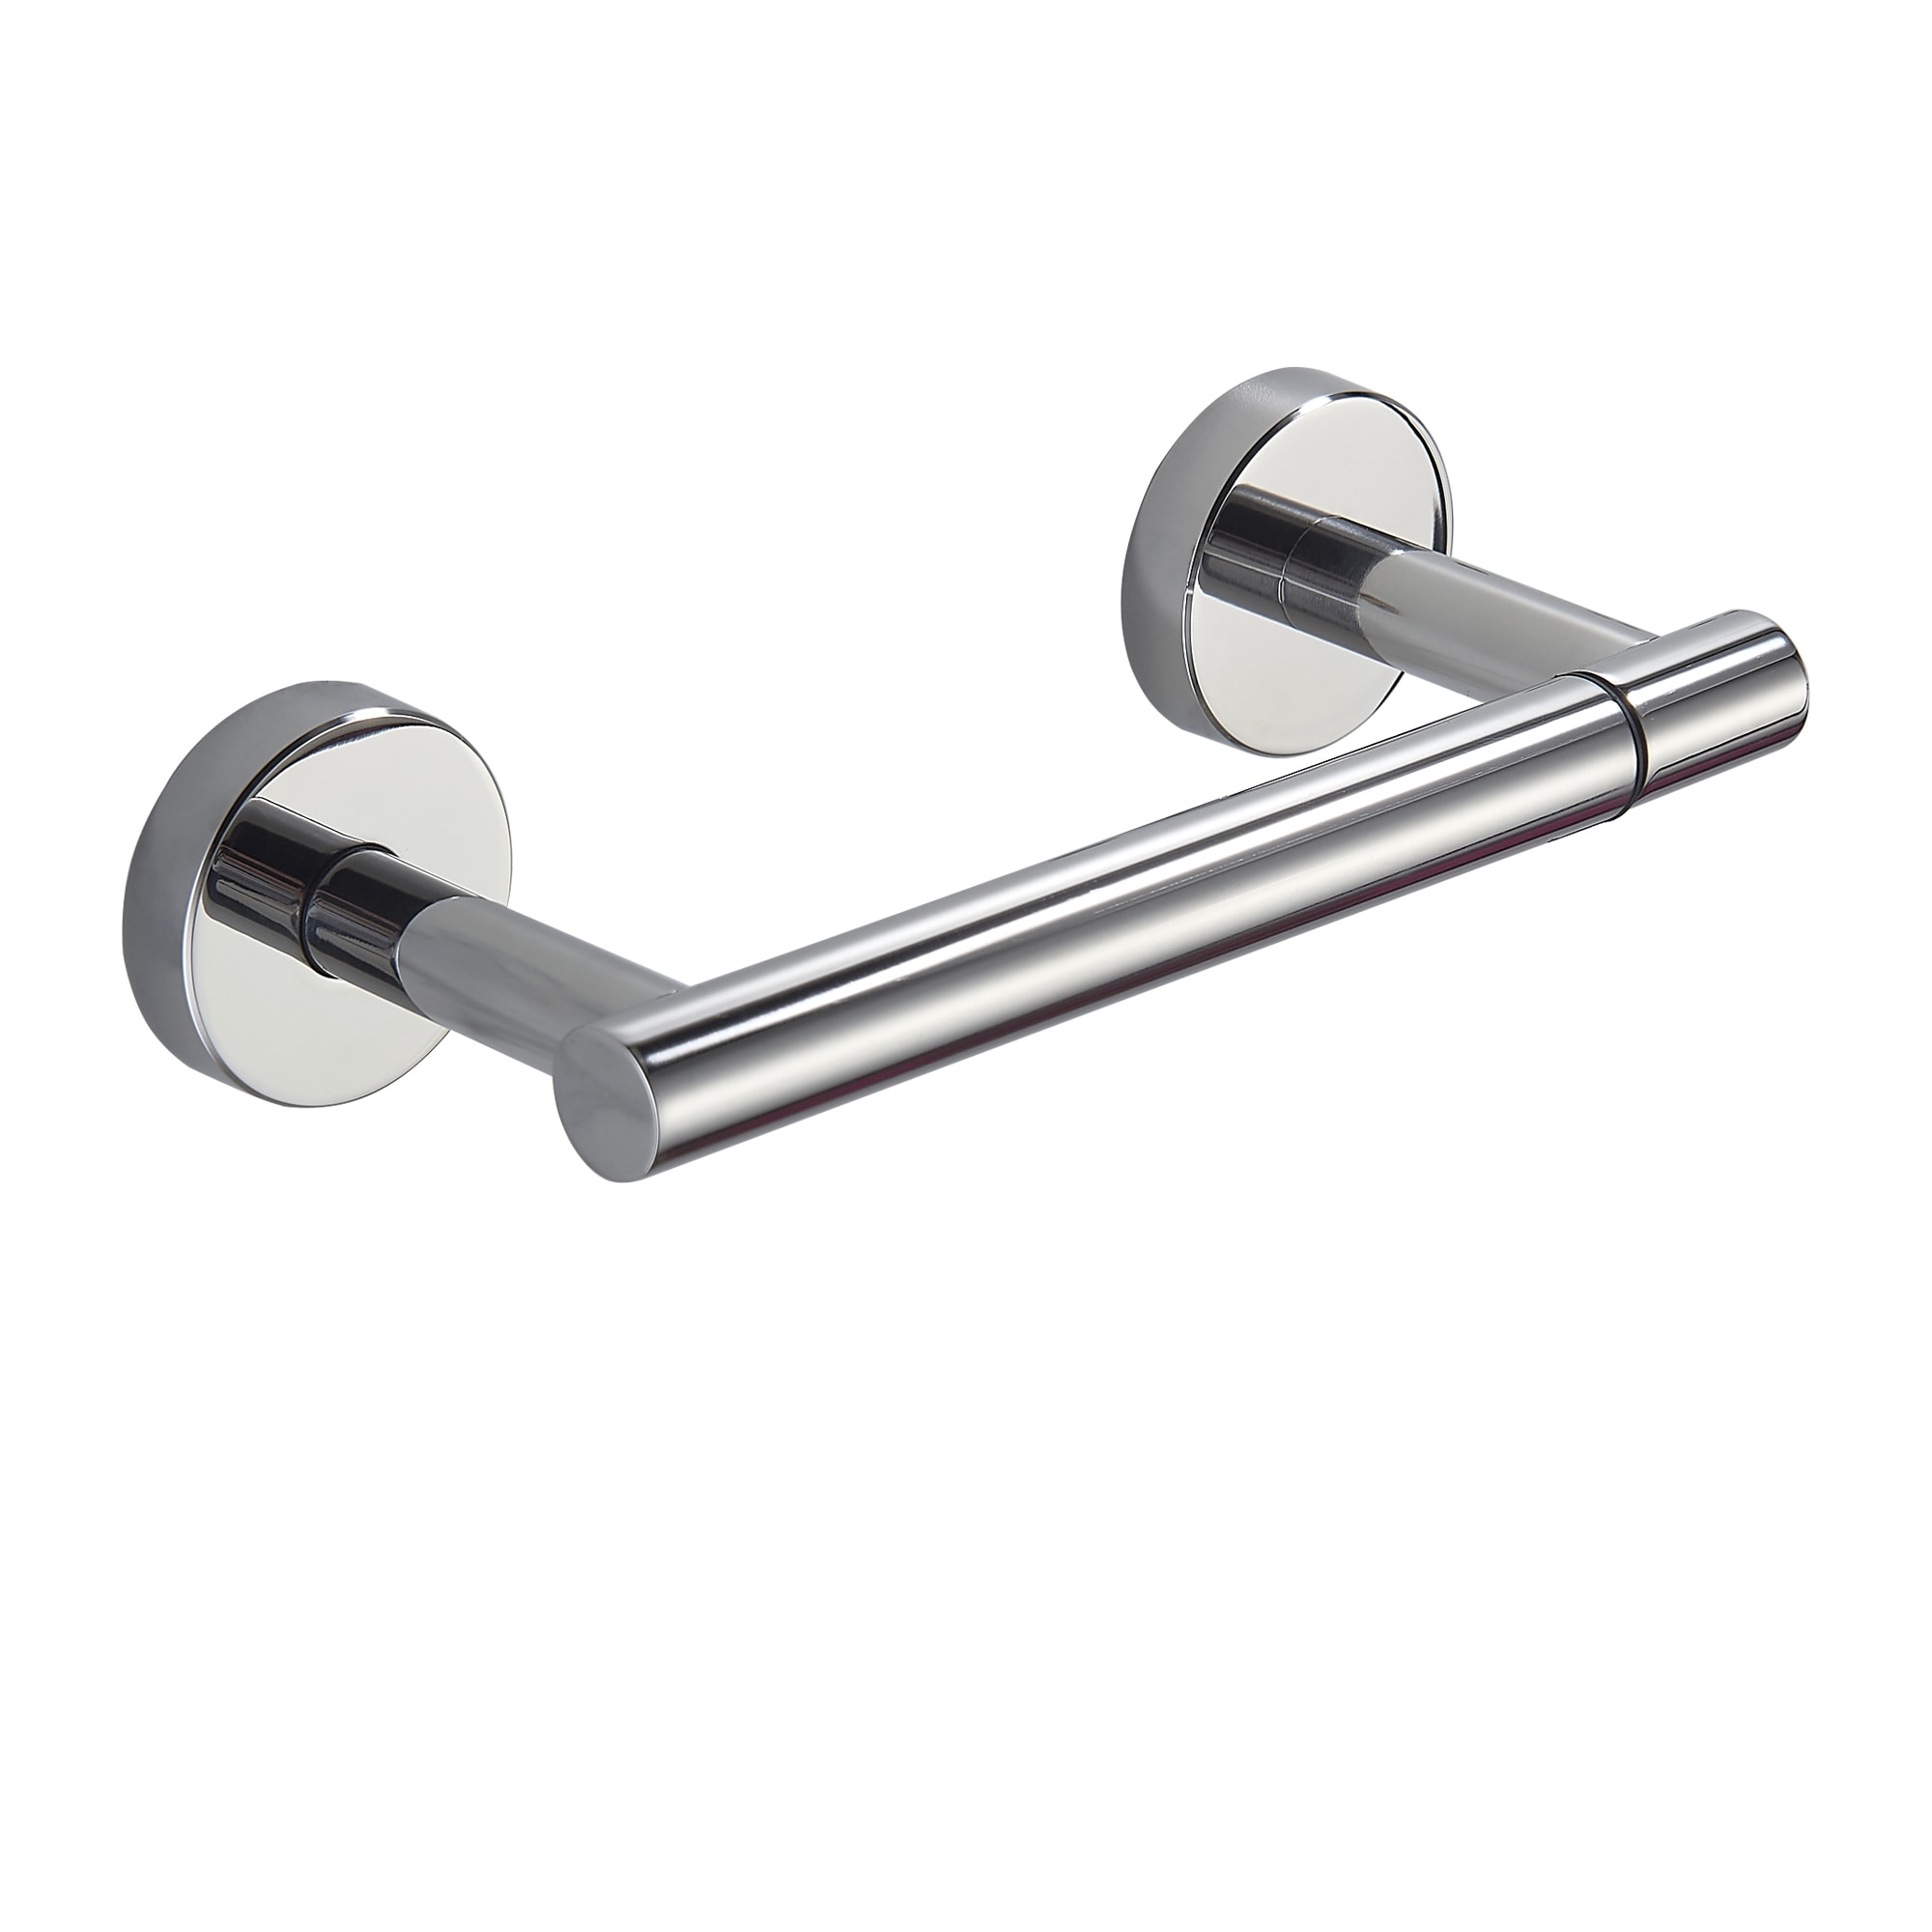 Forious forious recessed toilet paper holder brushed nickel